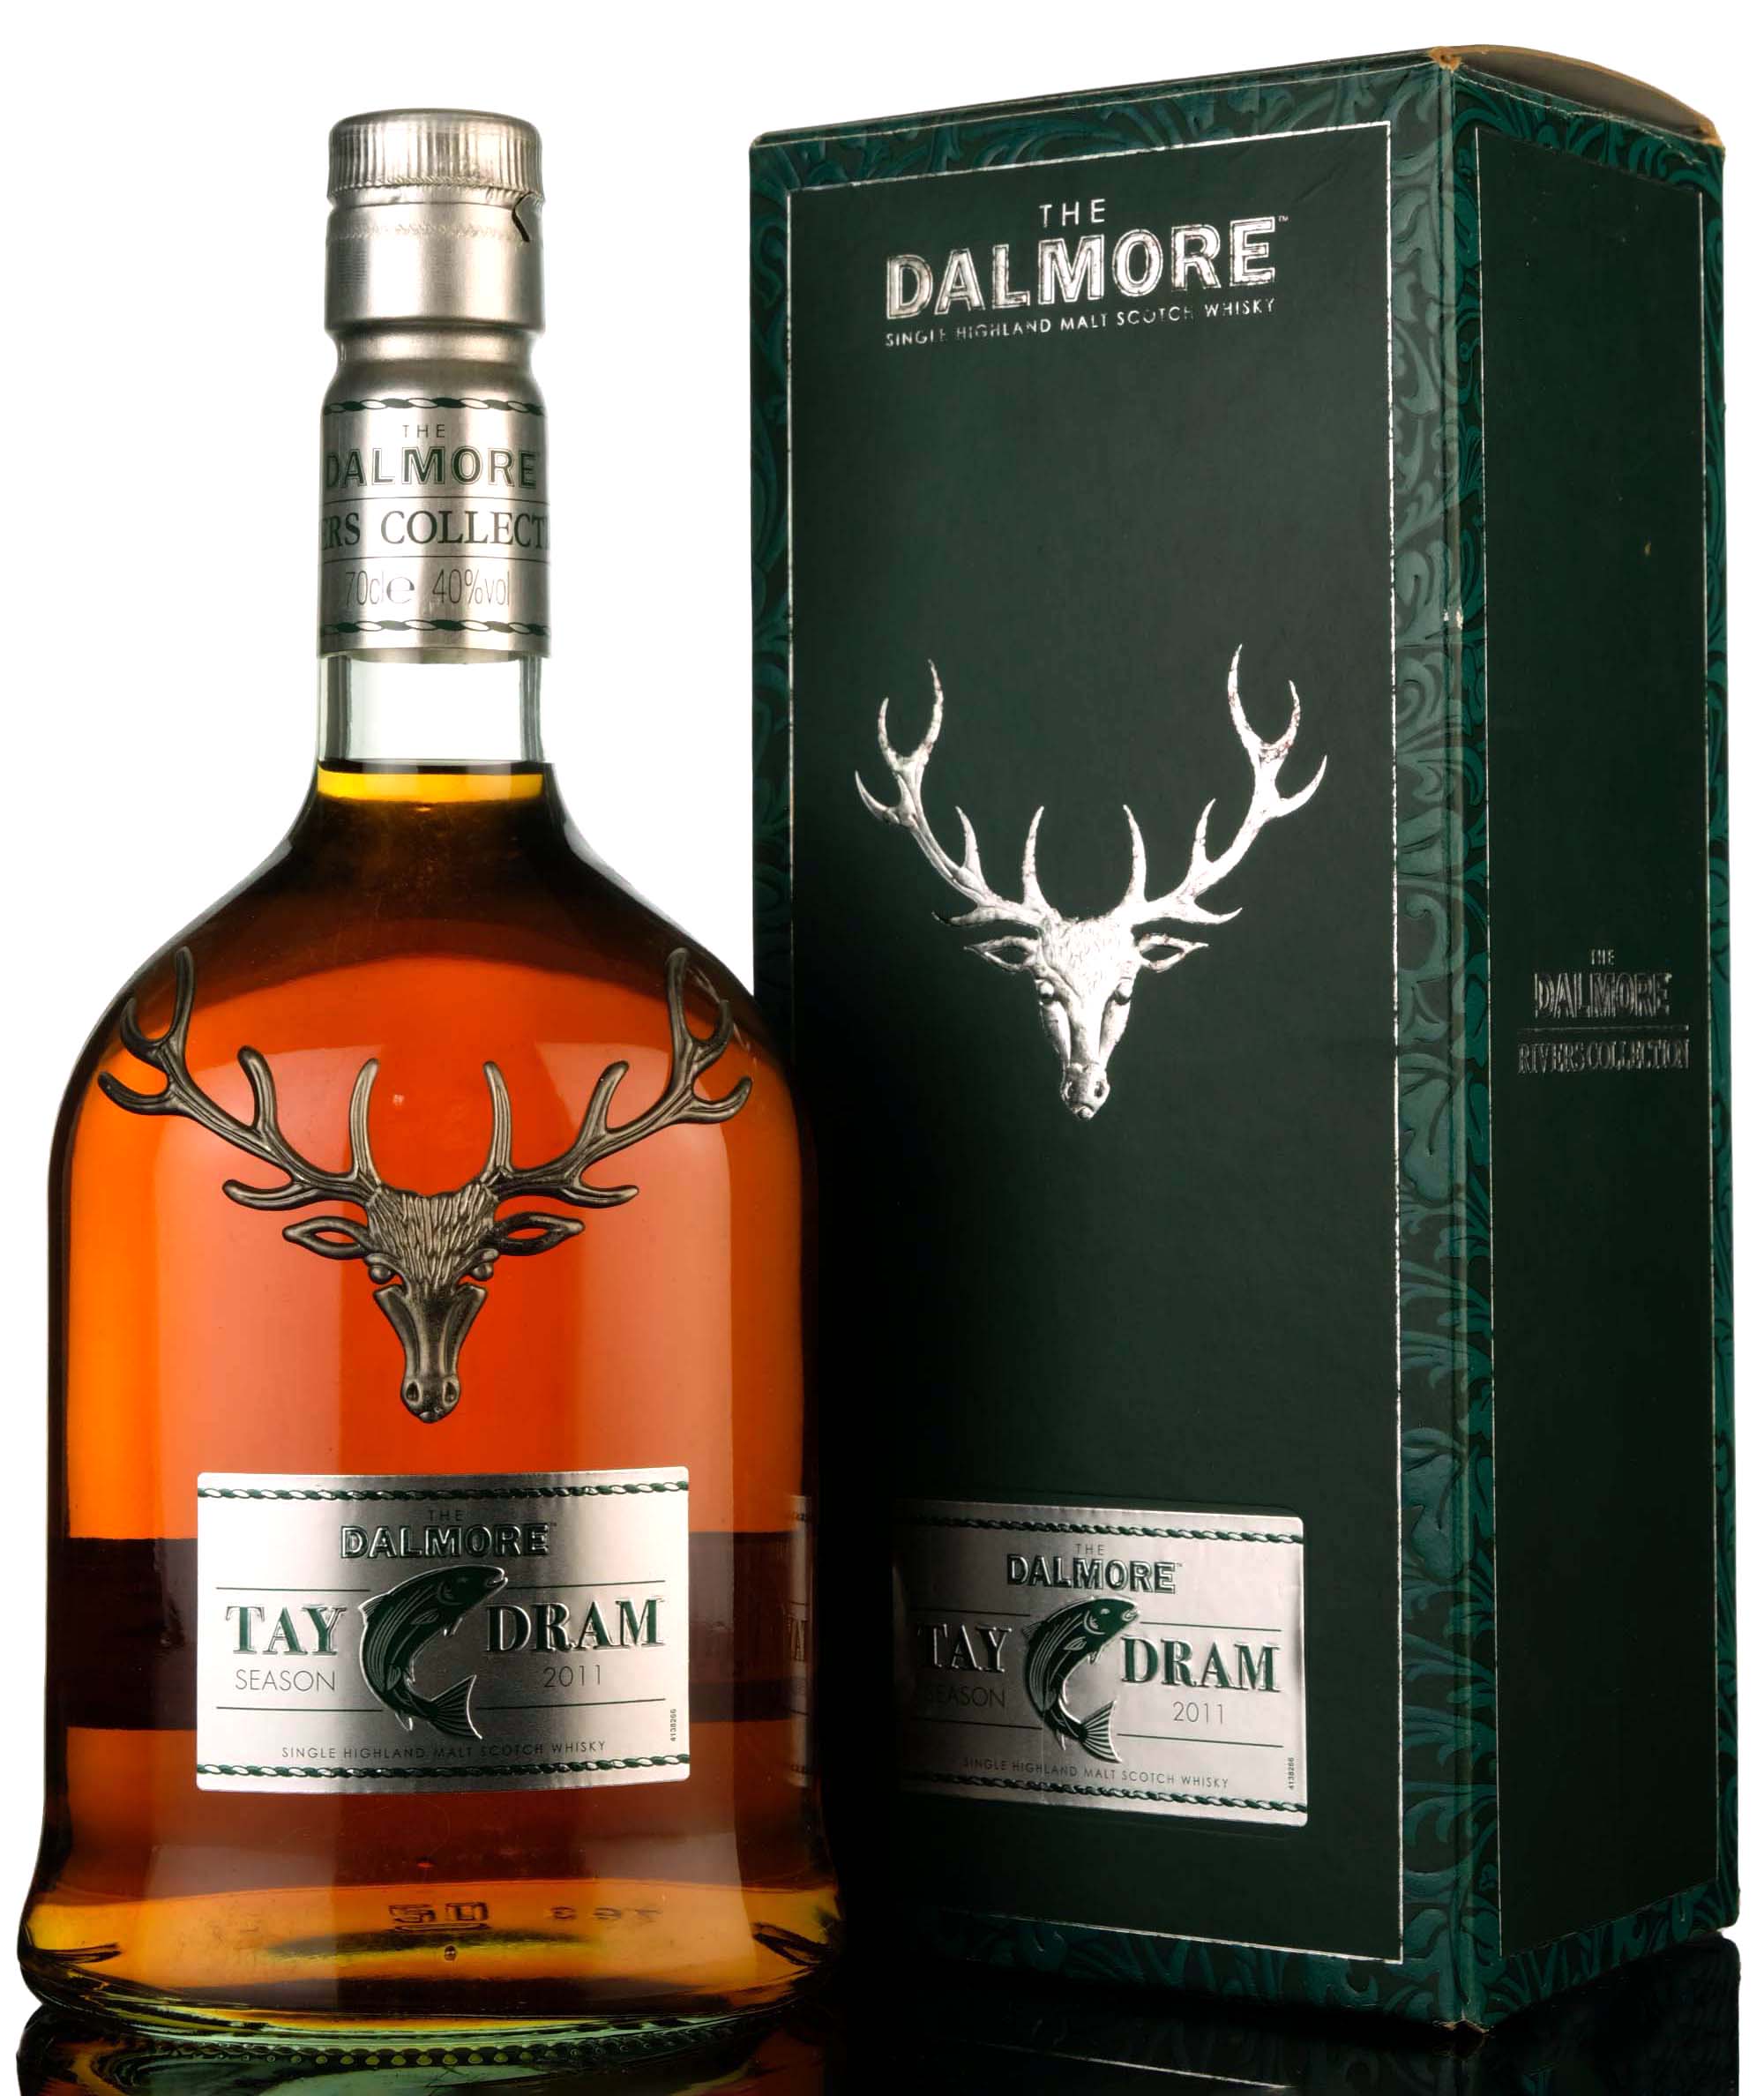 Dalmore Rivers Series - Tay Dram - 2011 Release